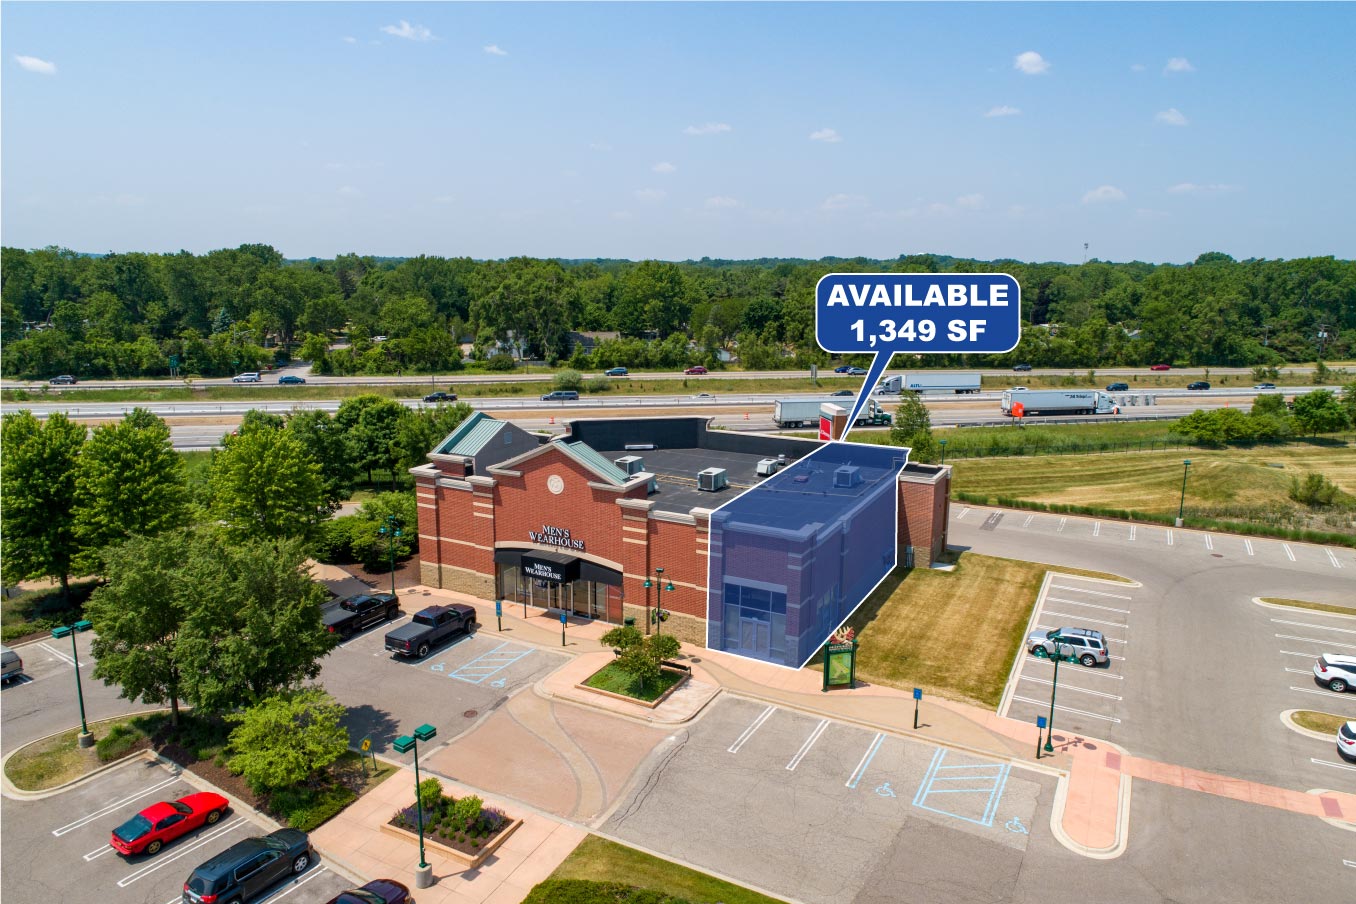 Green Oak Village Place 1349 SF available for lease